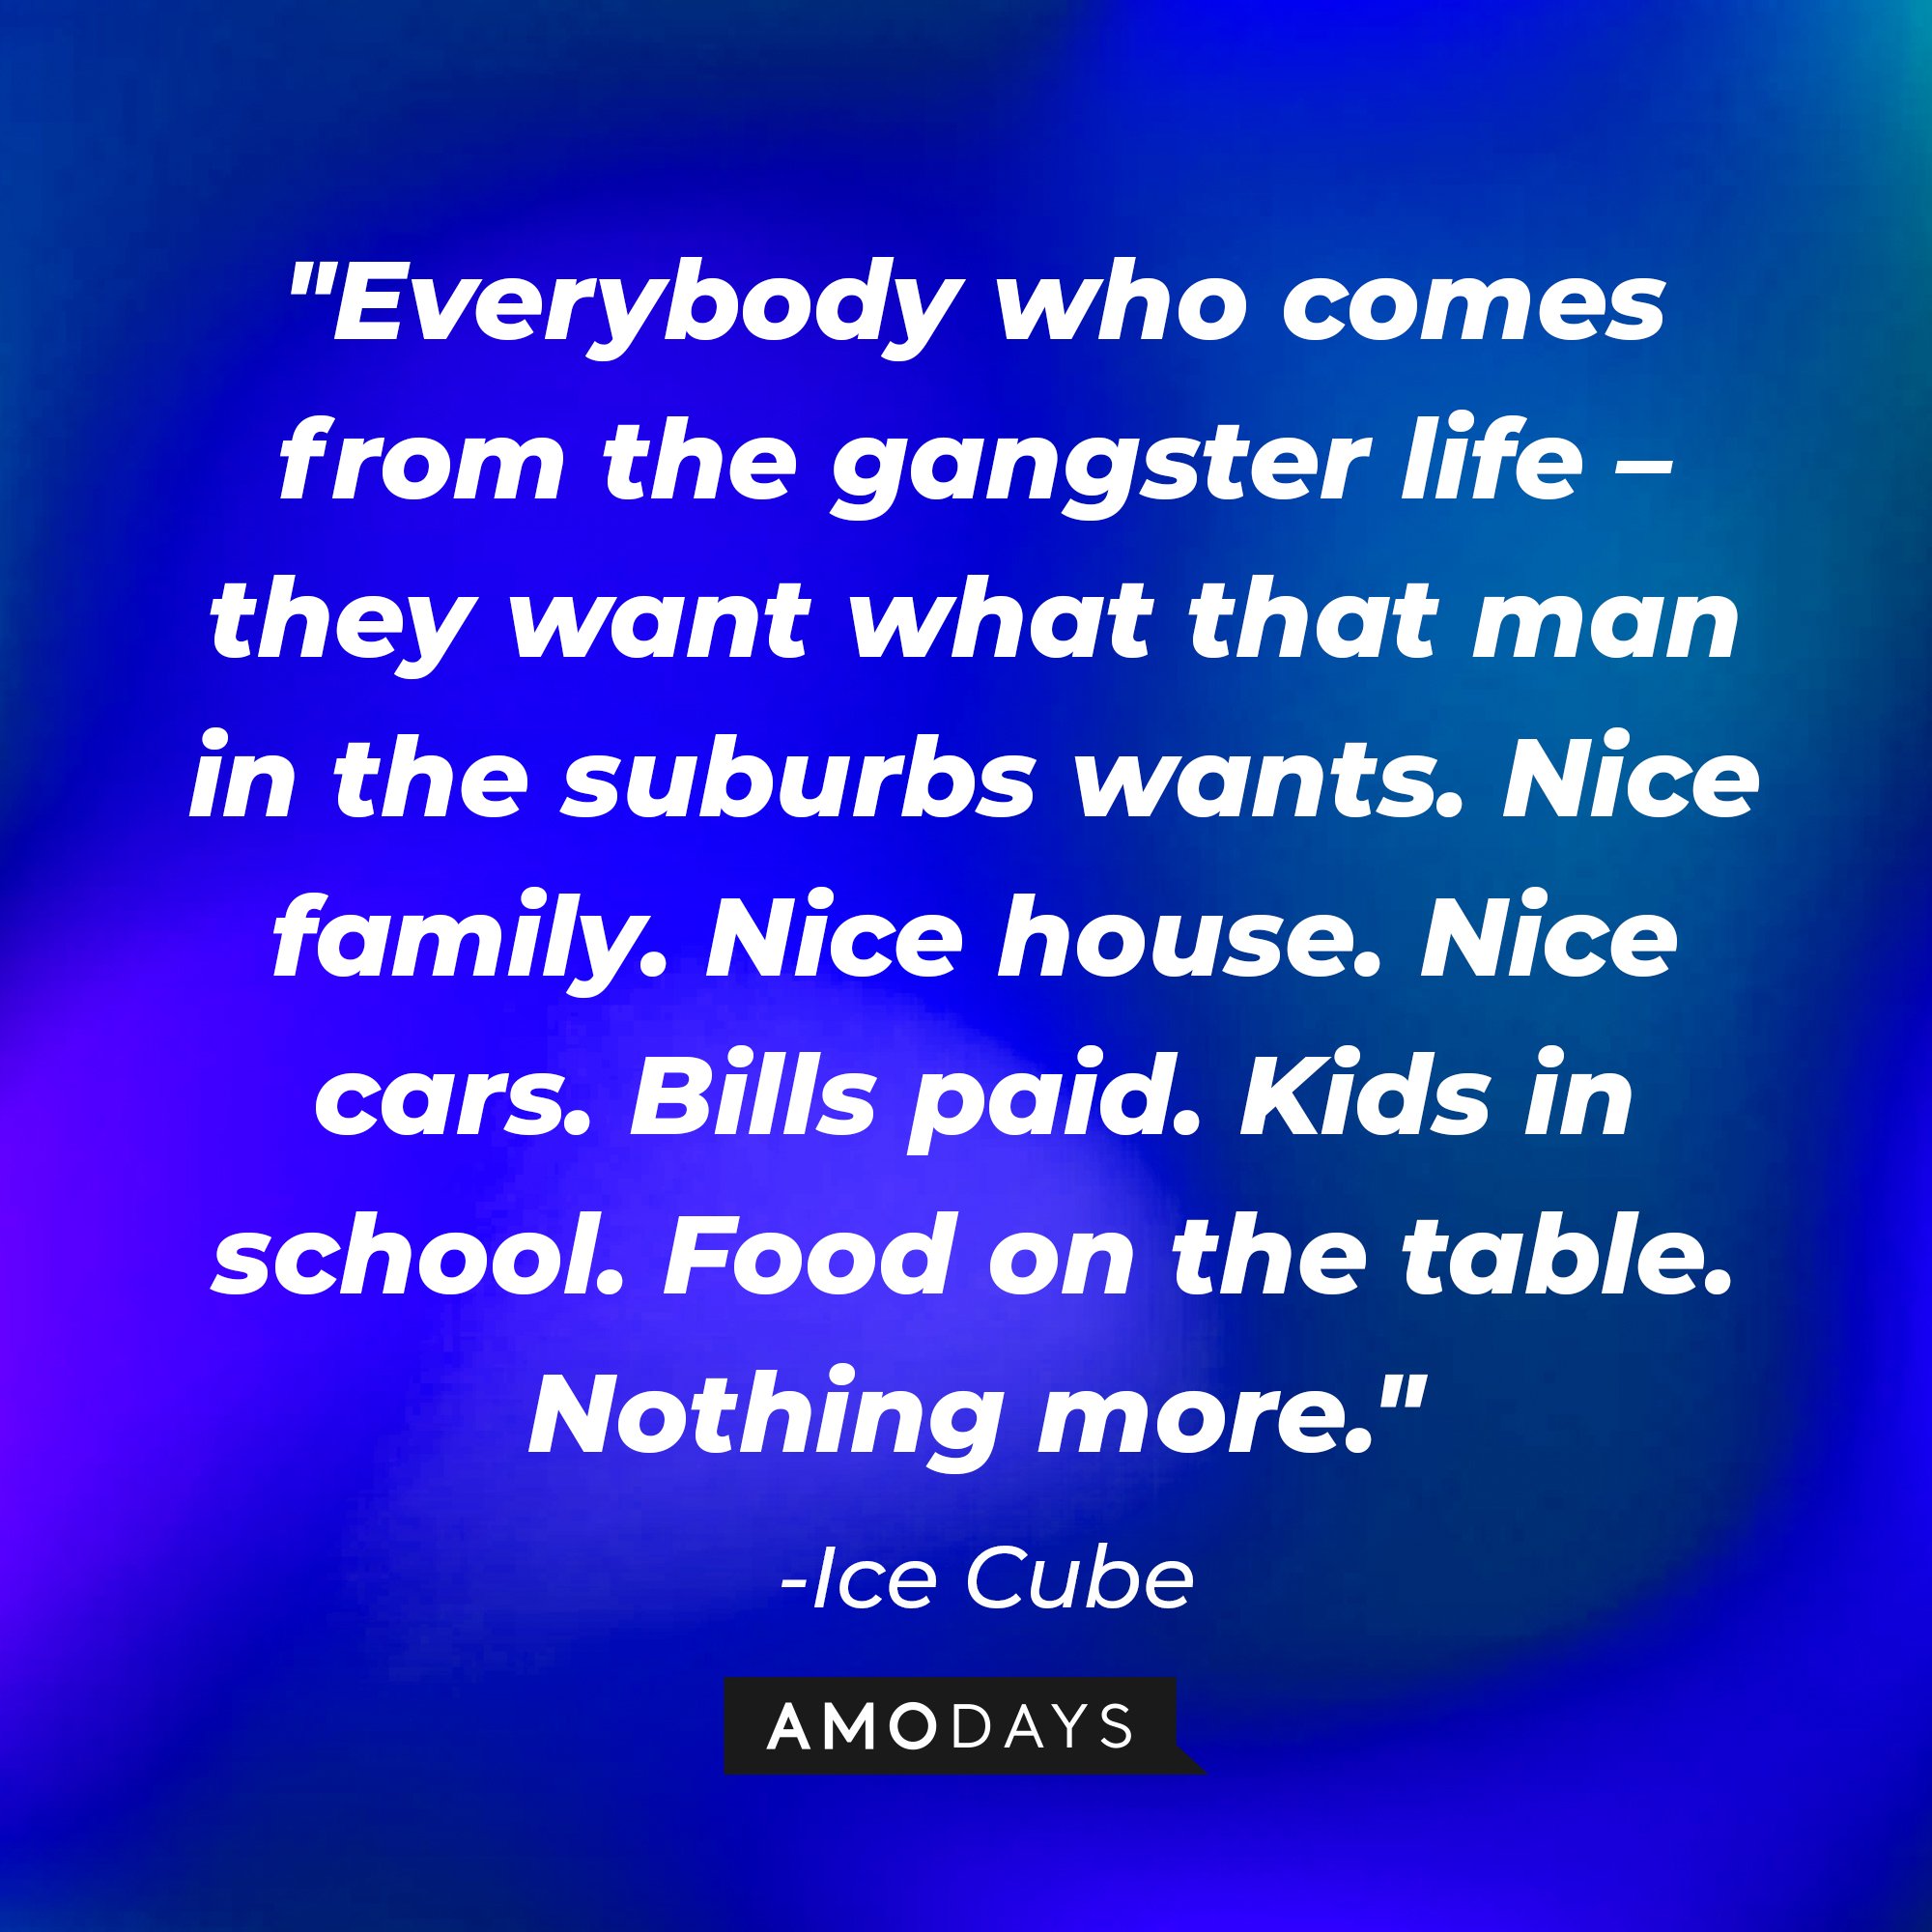 Ice Cube's quote: "Everybody who comes from the gangster life – they want what that man in the suburbs wants. Nice family. Nice house. Nice cars. Bills paid. Kids in school. Food on the table. Nothing more." — Ice Cube | Image: AmoDays